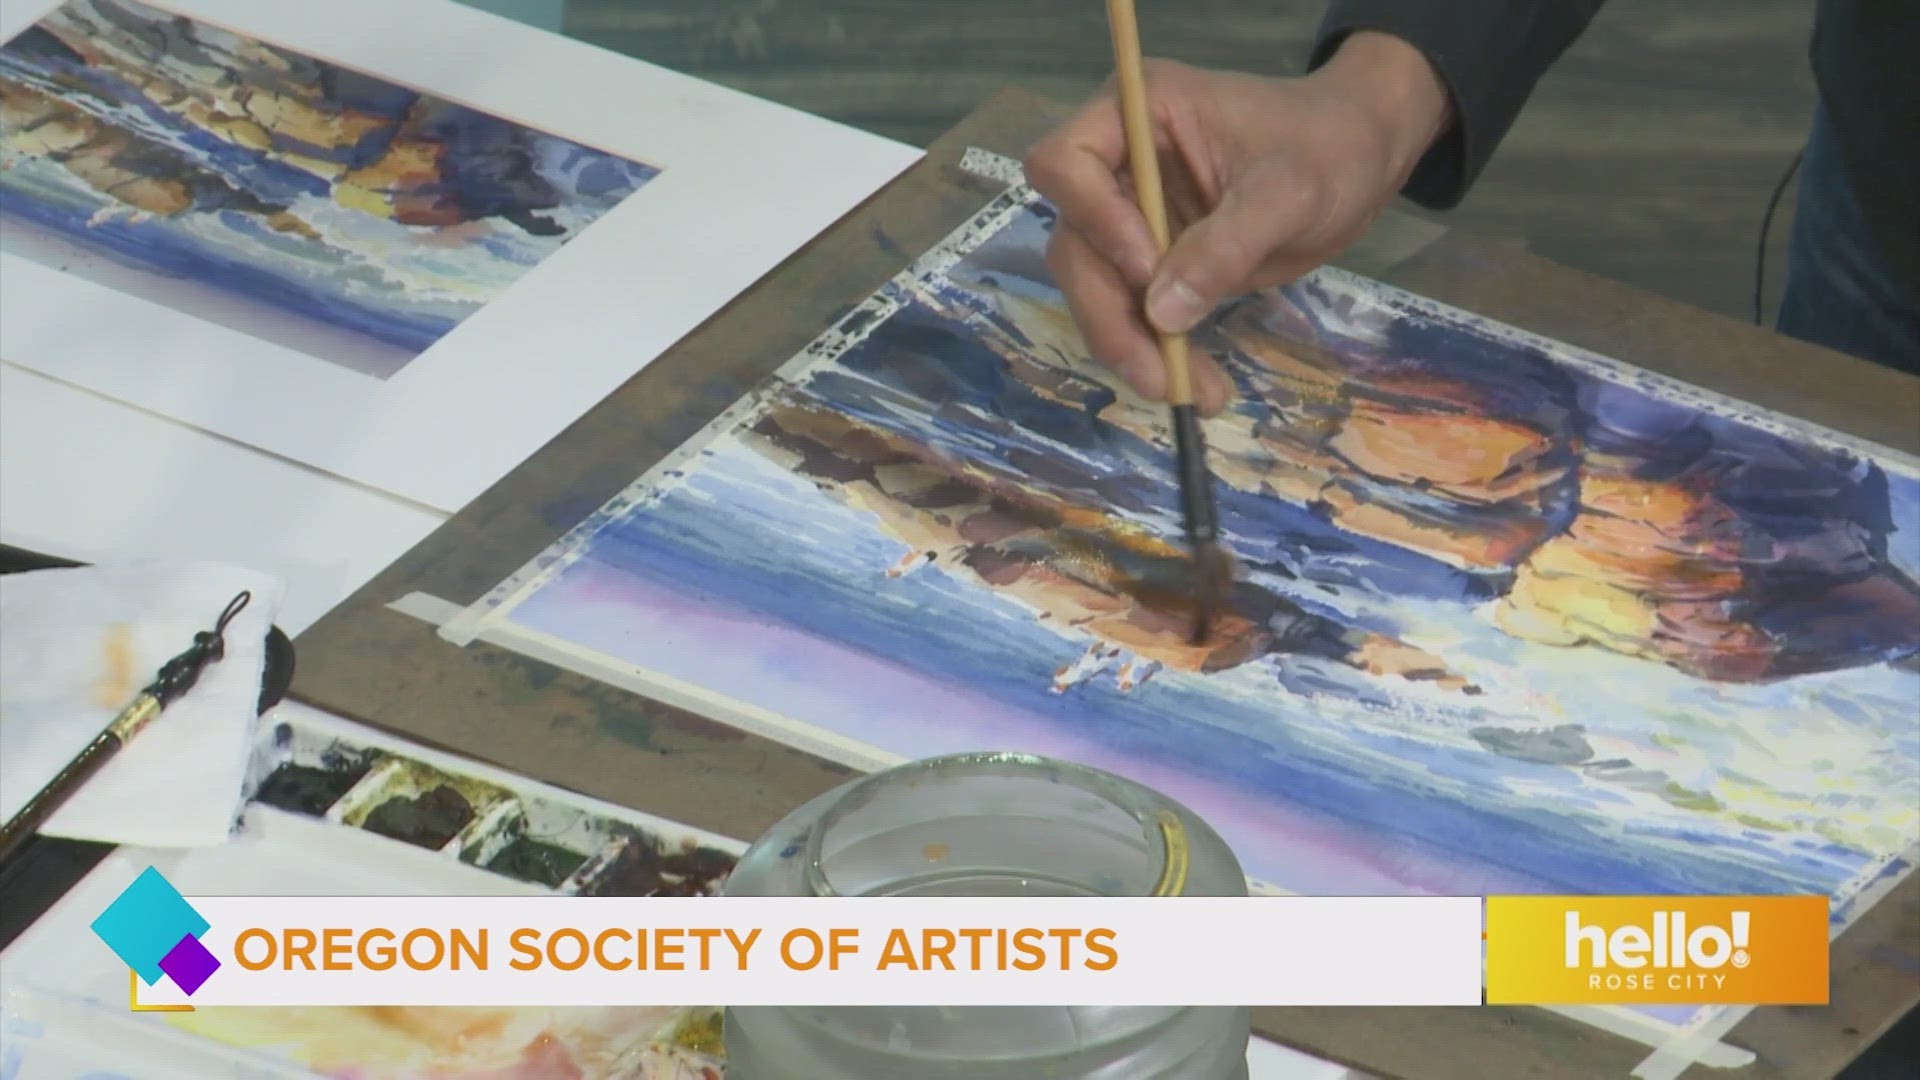 Oregon Society of Artists offers classes and workshops and has a gallery